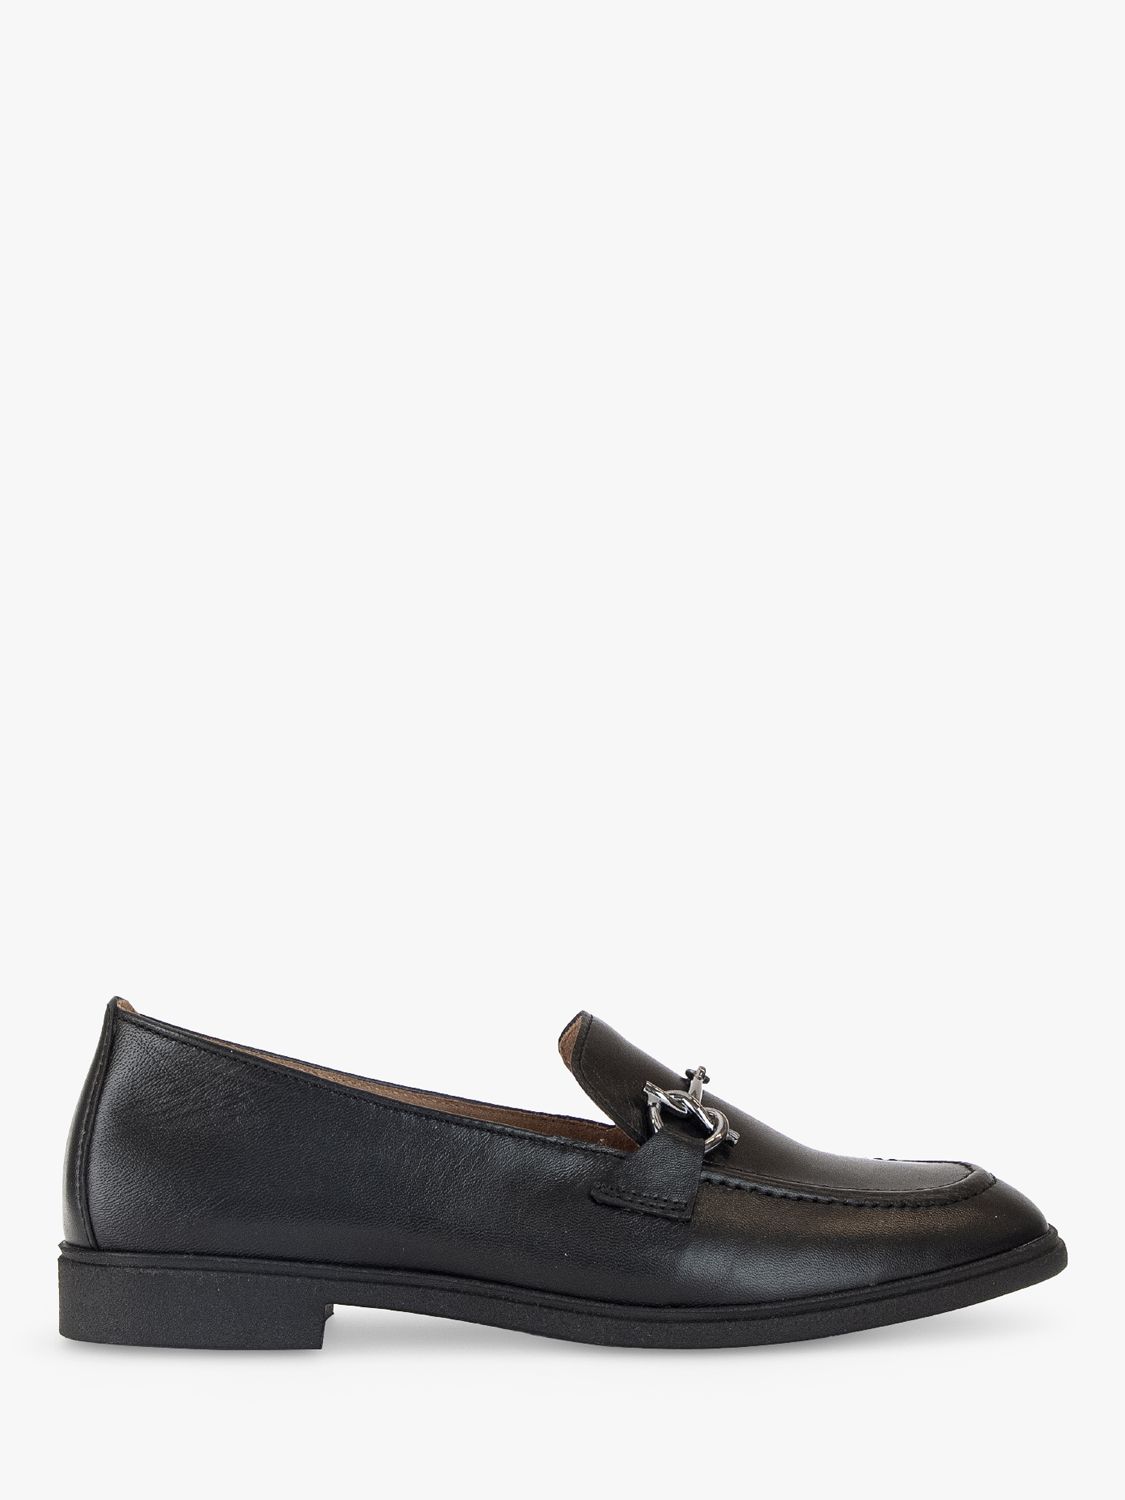 Gabor Beaumont Leather Loafers, Black at John Lewis & Partners